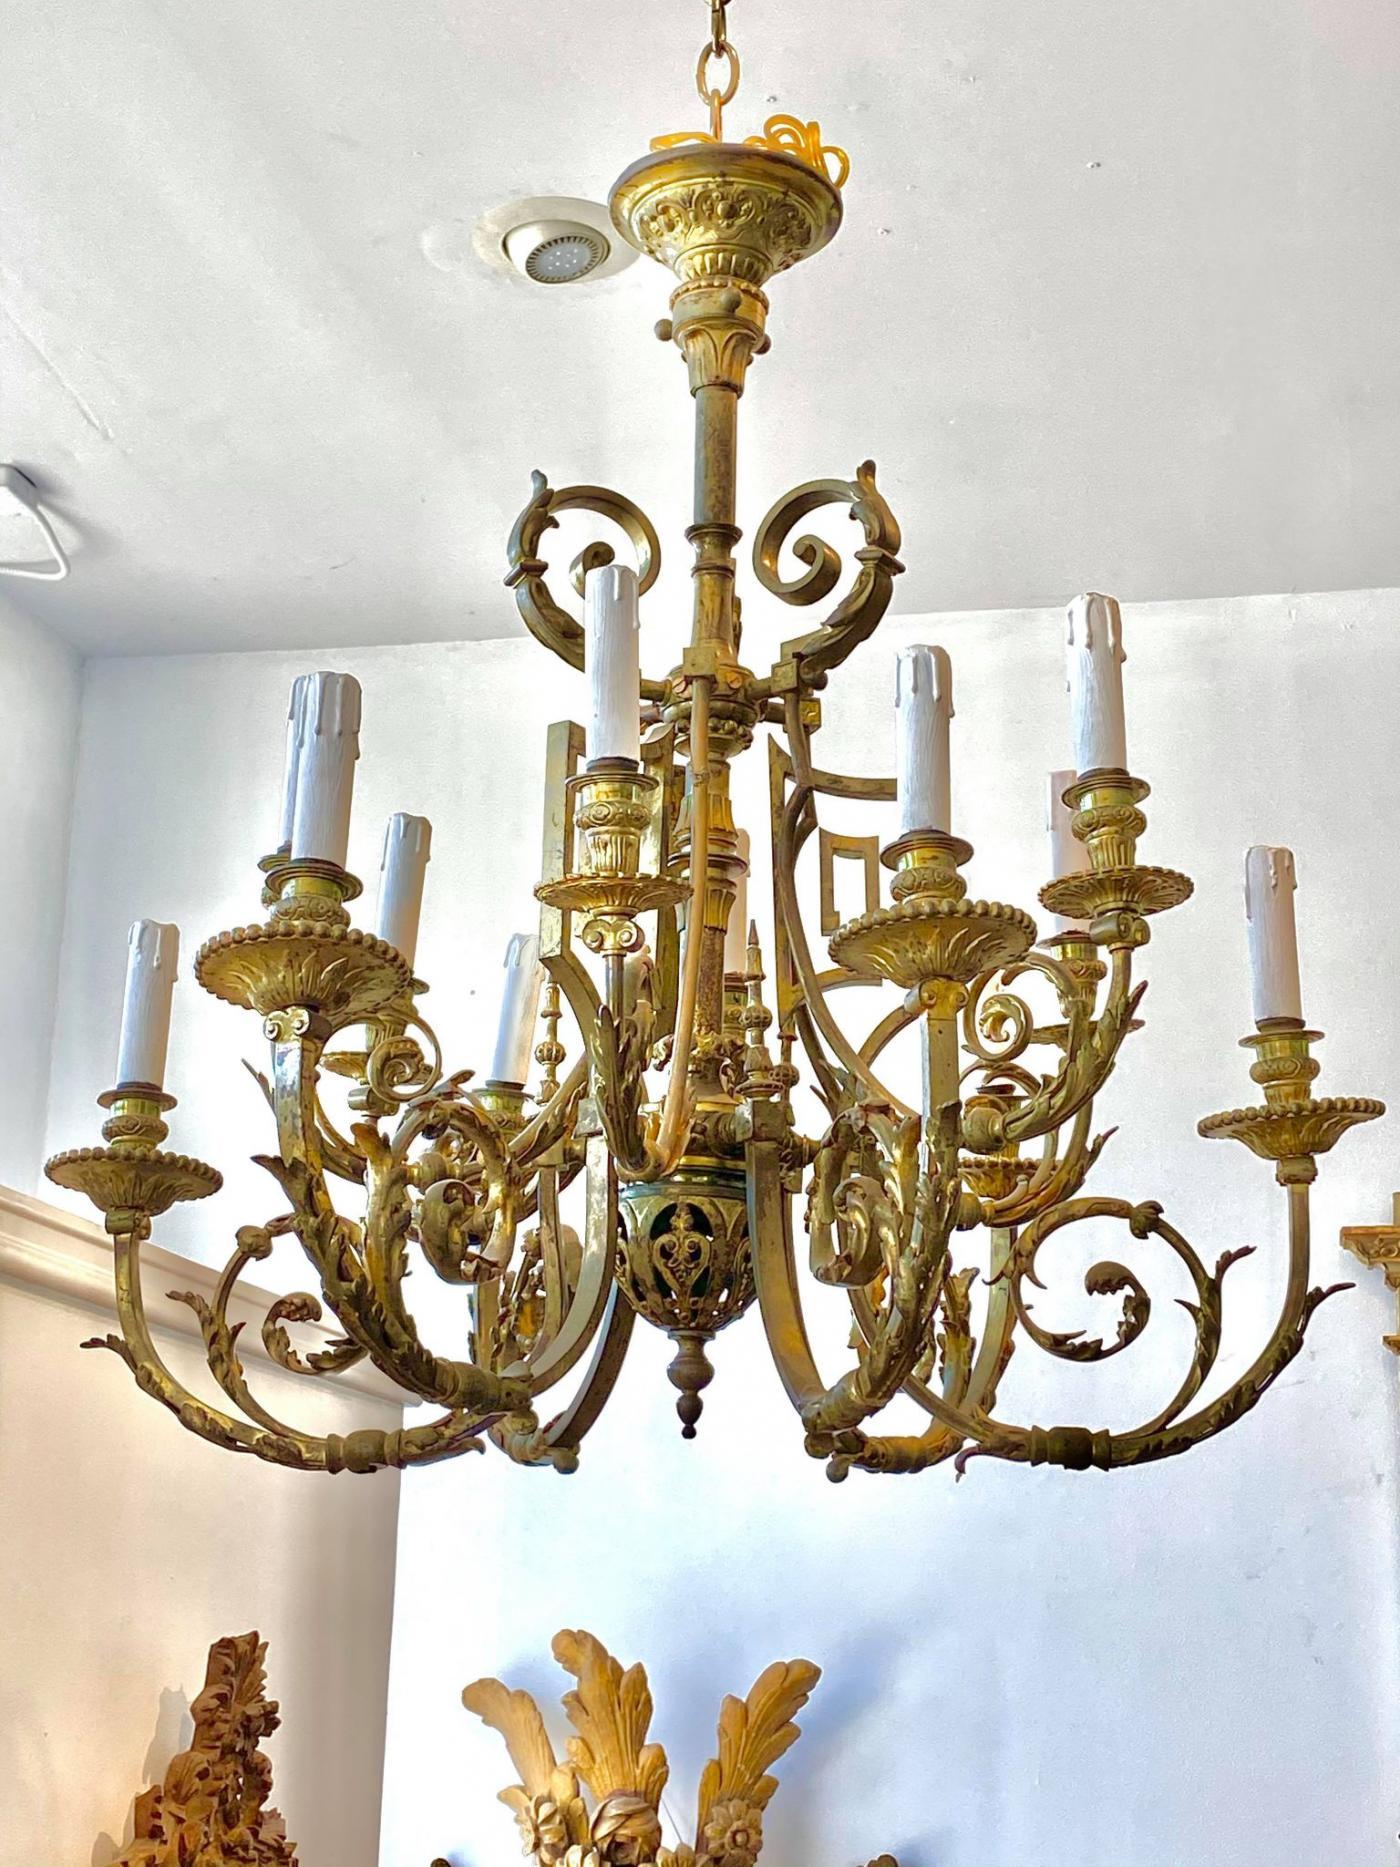 Vasiform fluted standard issuing leaf and bellflower cast arms with fluted nozzles above a pierced scrolling corona.